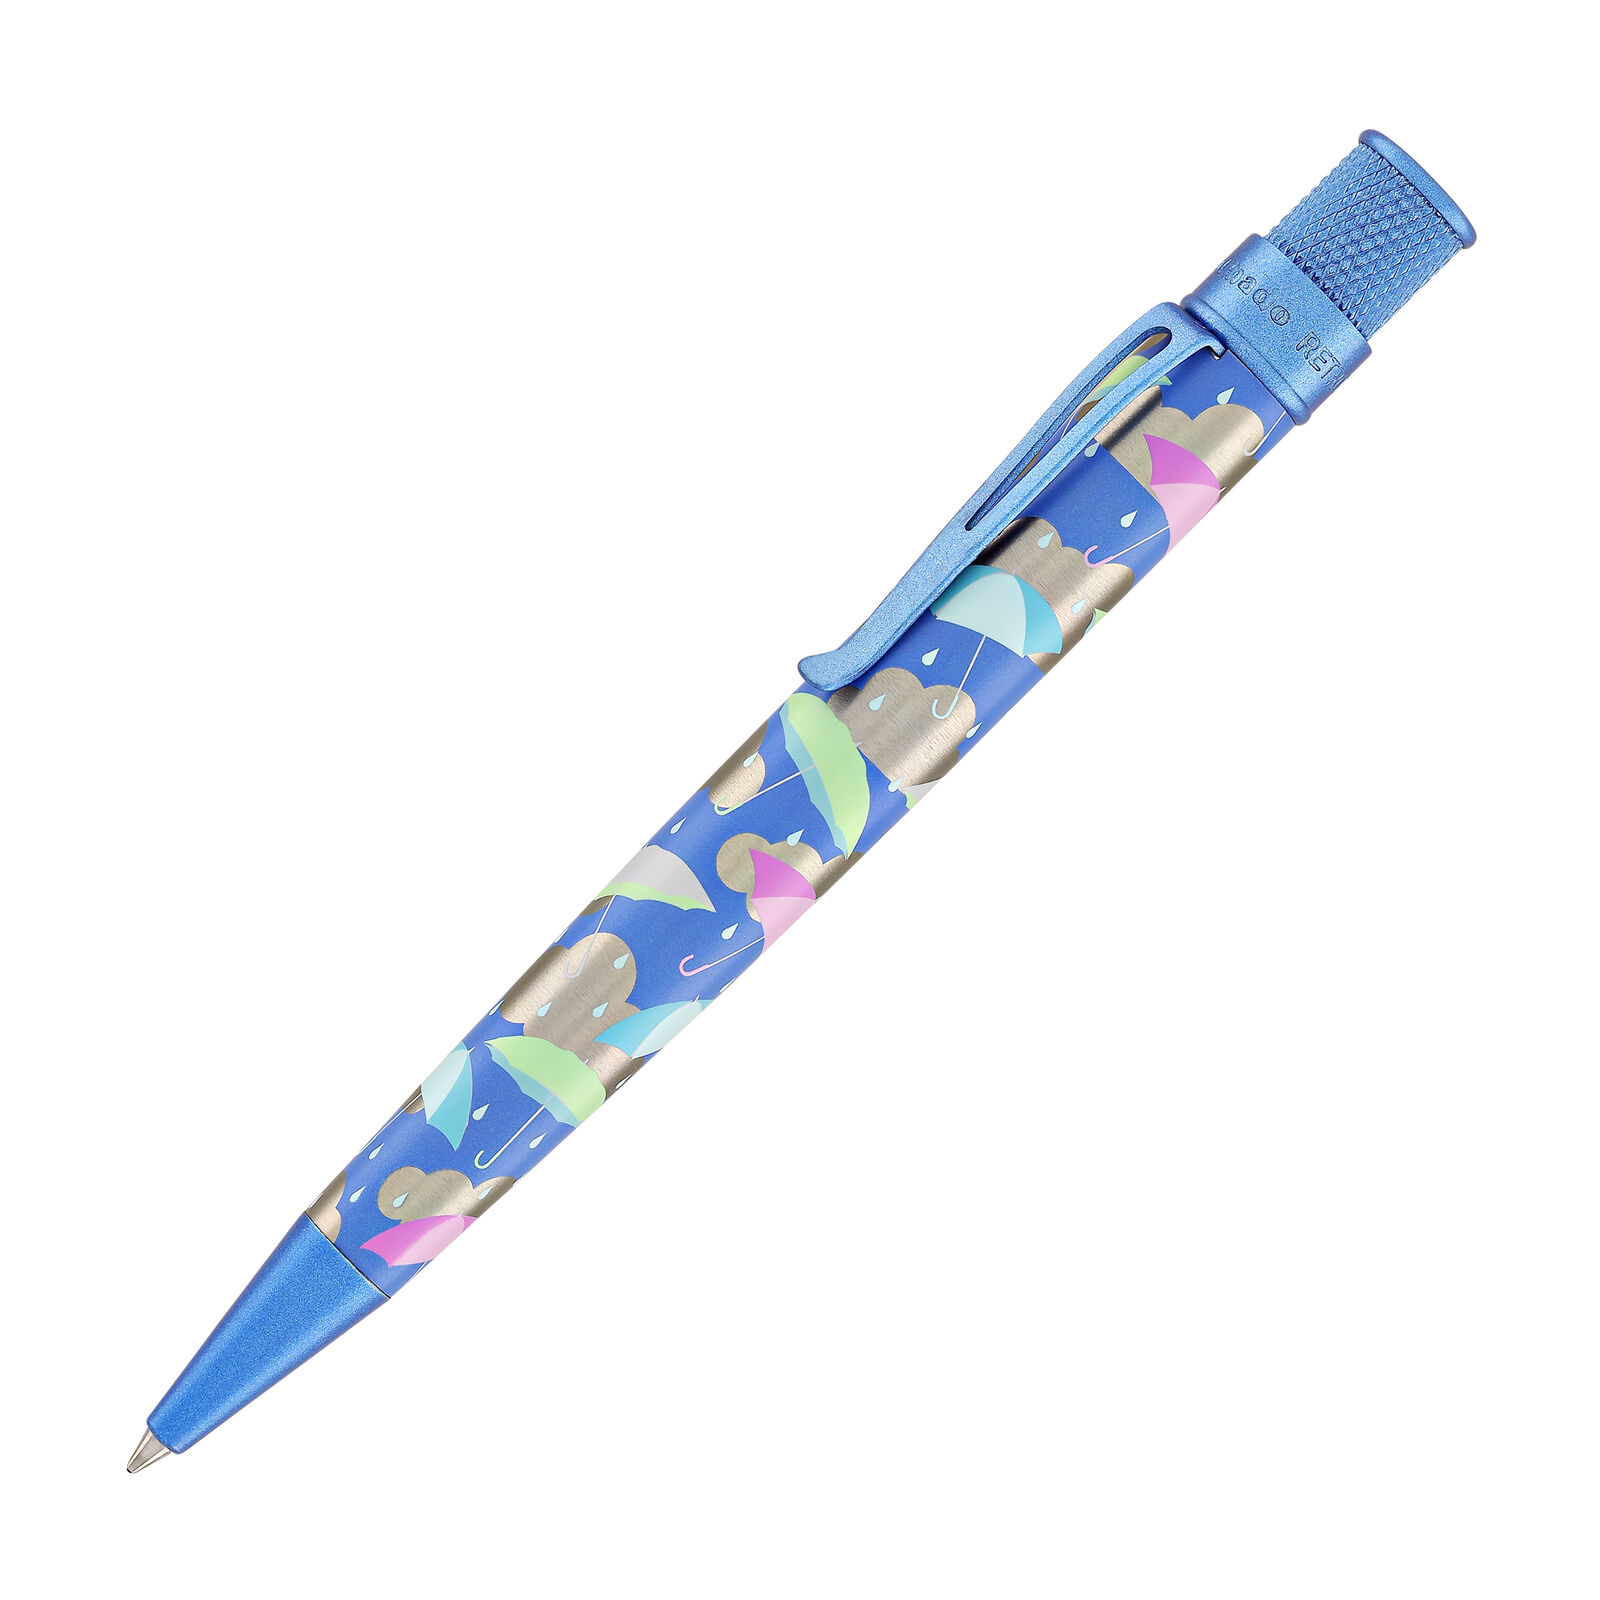 Retro 51 April Showers Rollerball Pen- NEW-SEALED-#'d